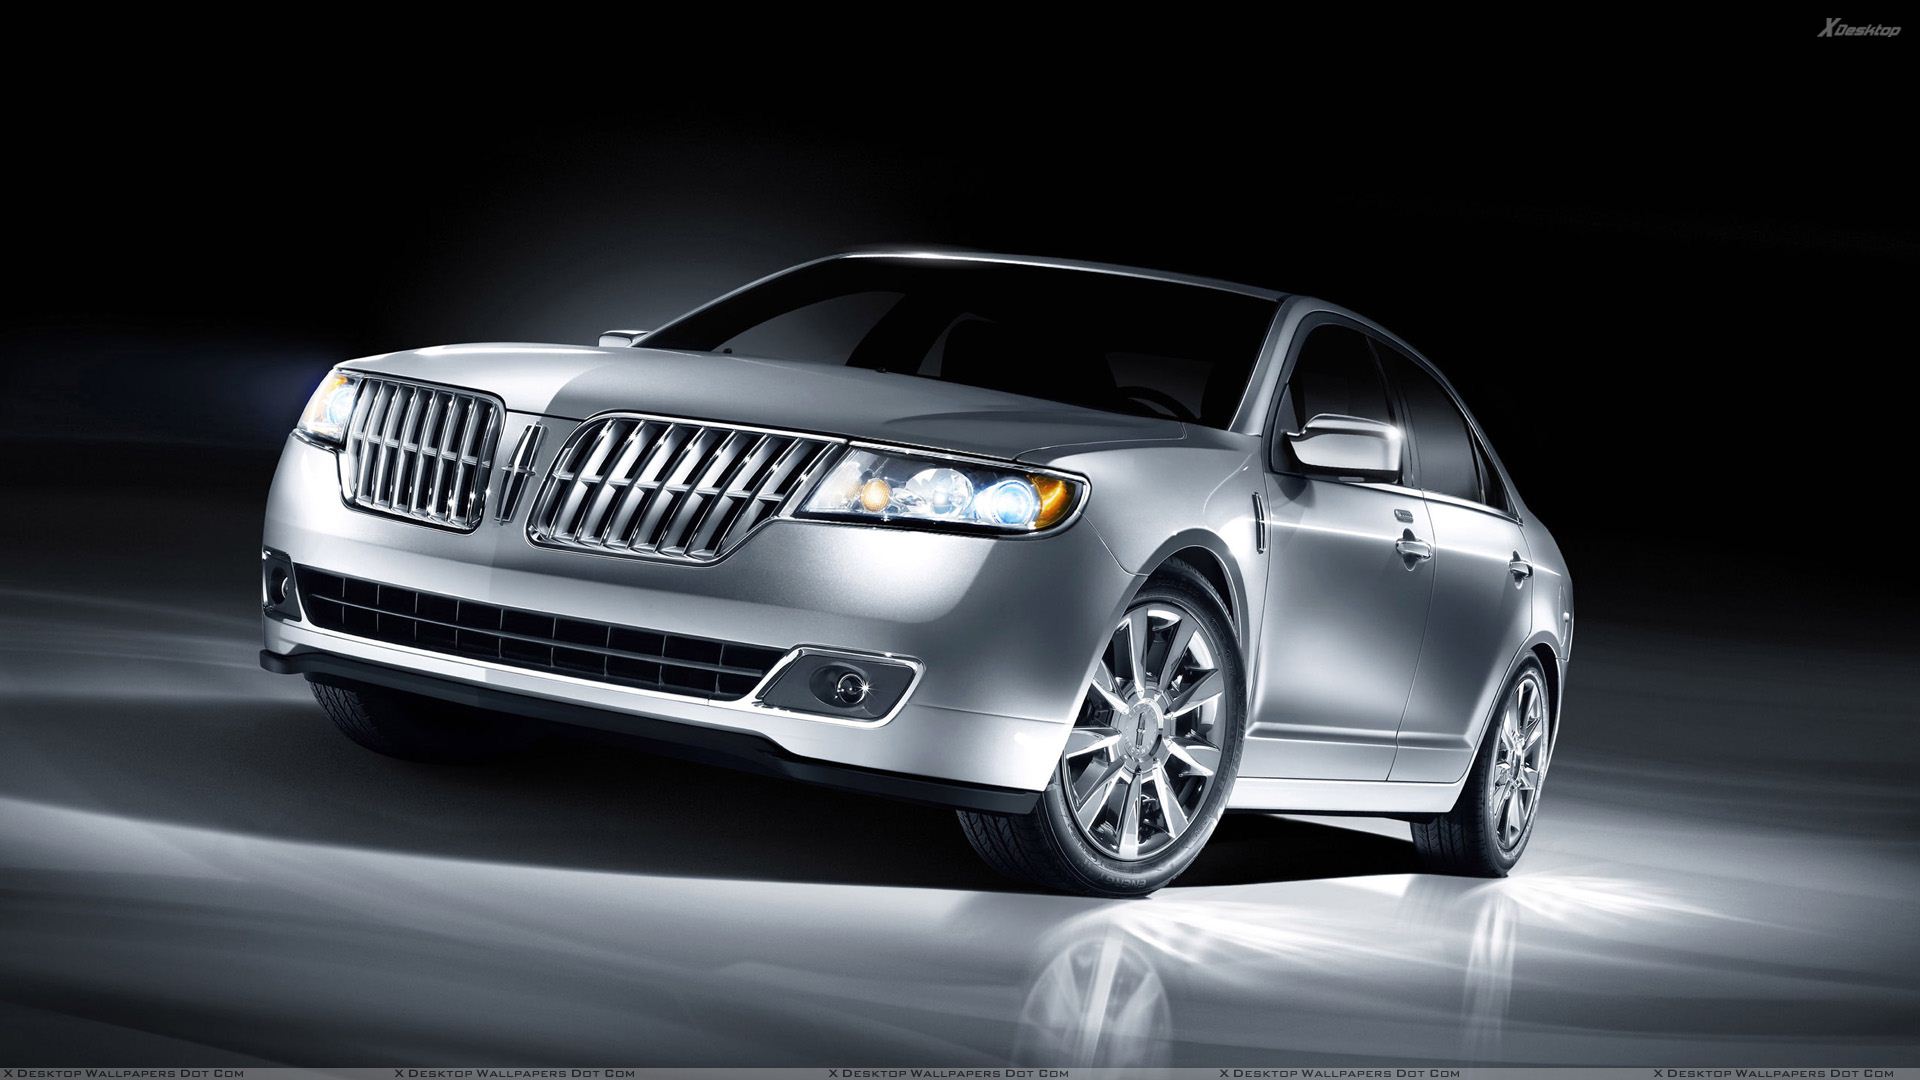 Lincoln Mkz Wallpaper Photos Image In HD